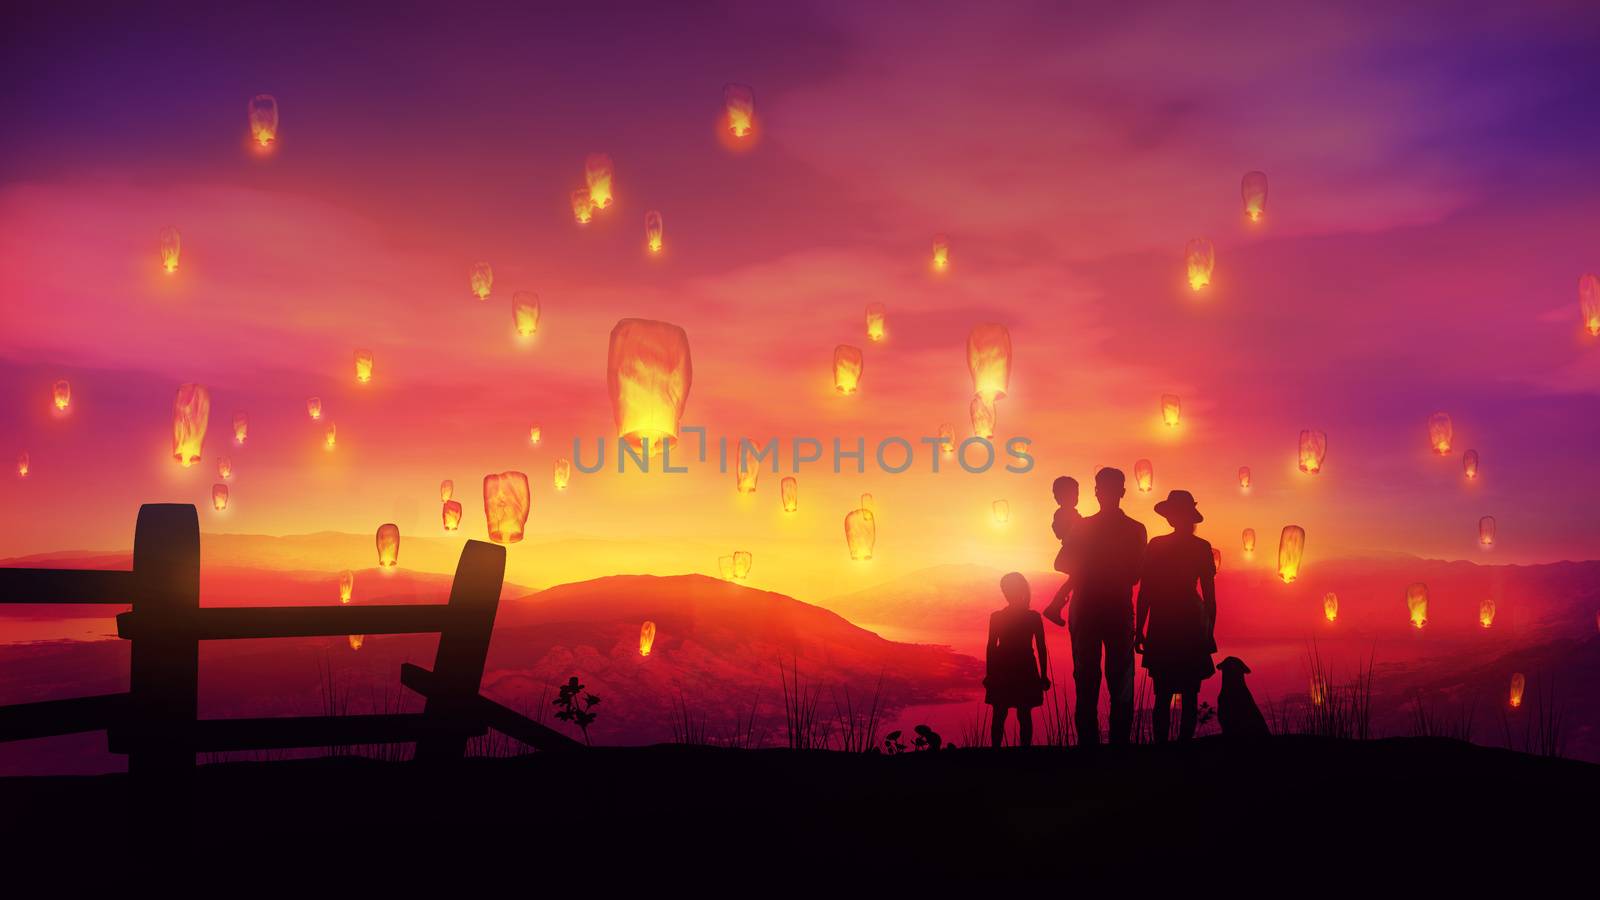 Family silhouettes standing against a red sunset and watching Chinese lanterns.